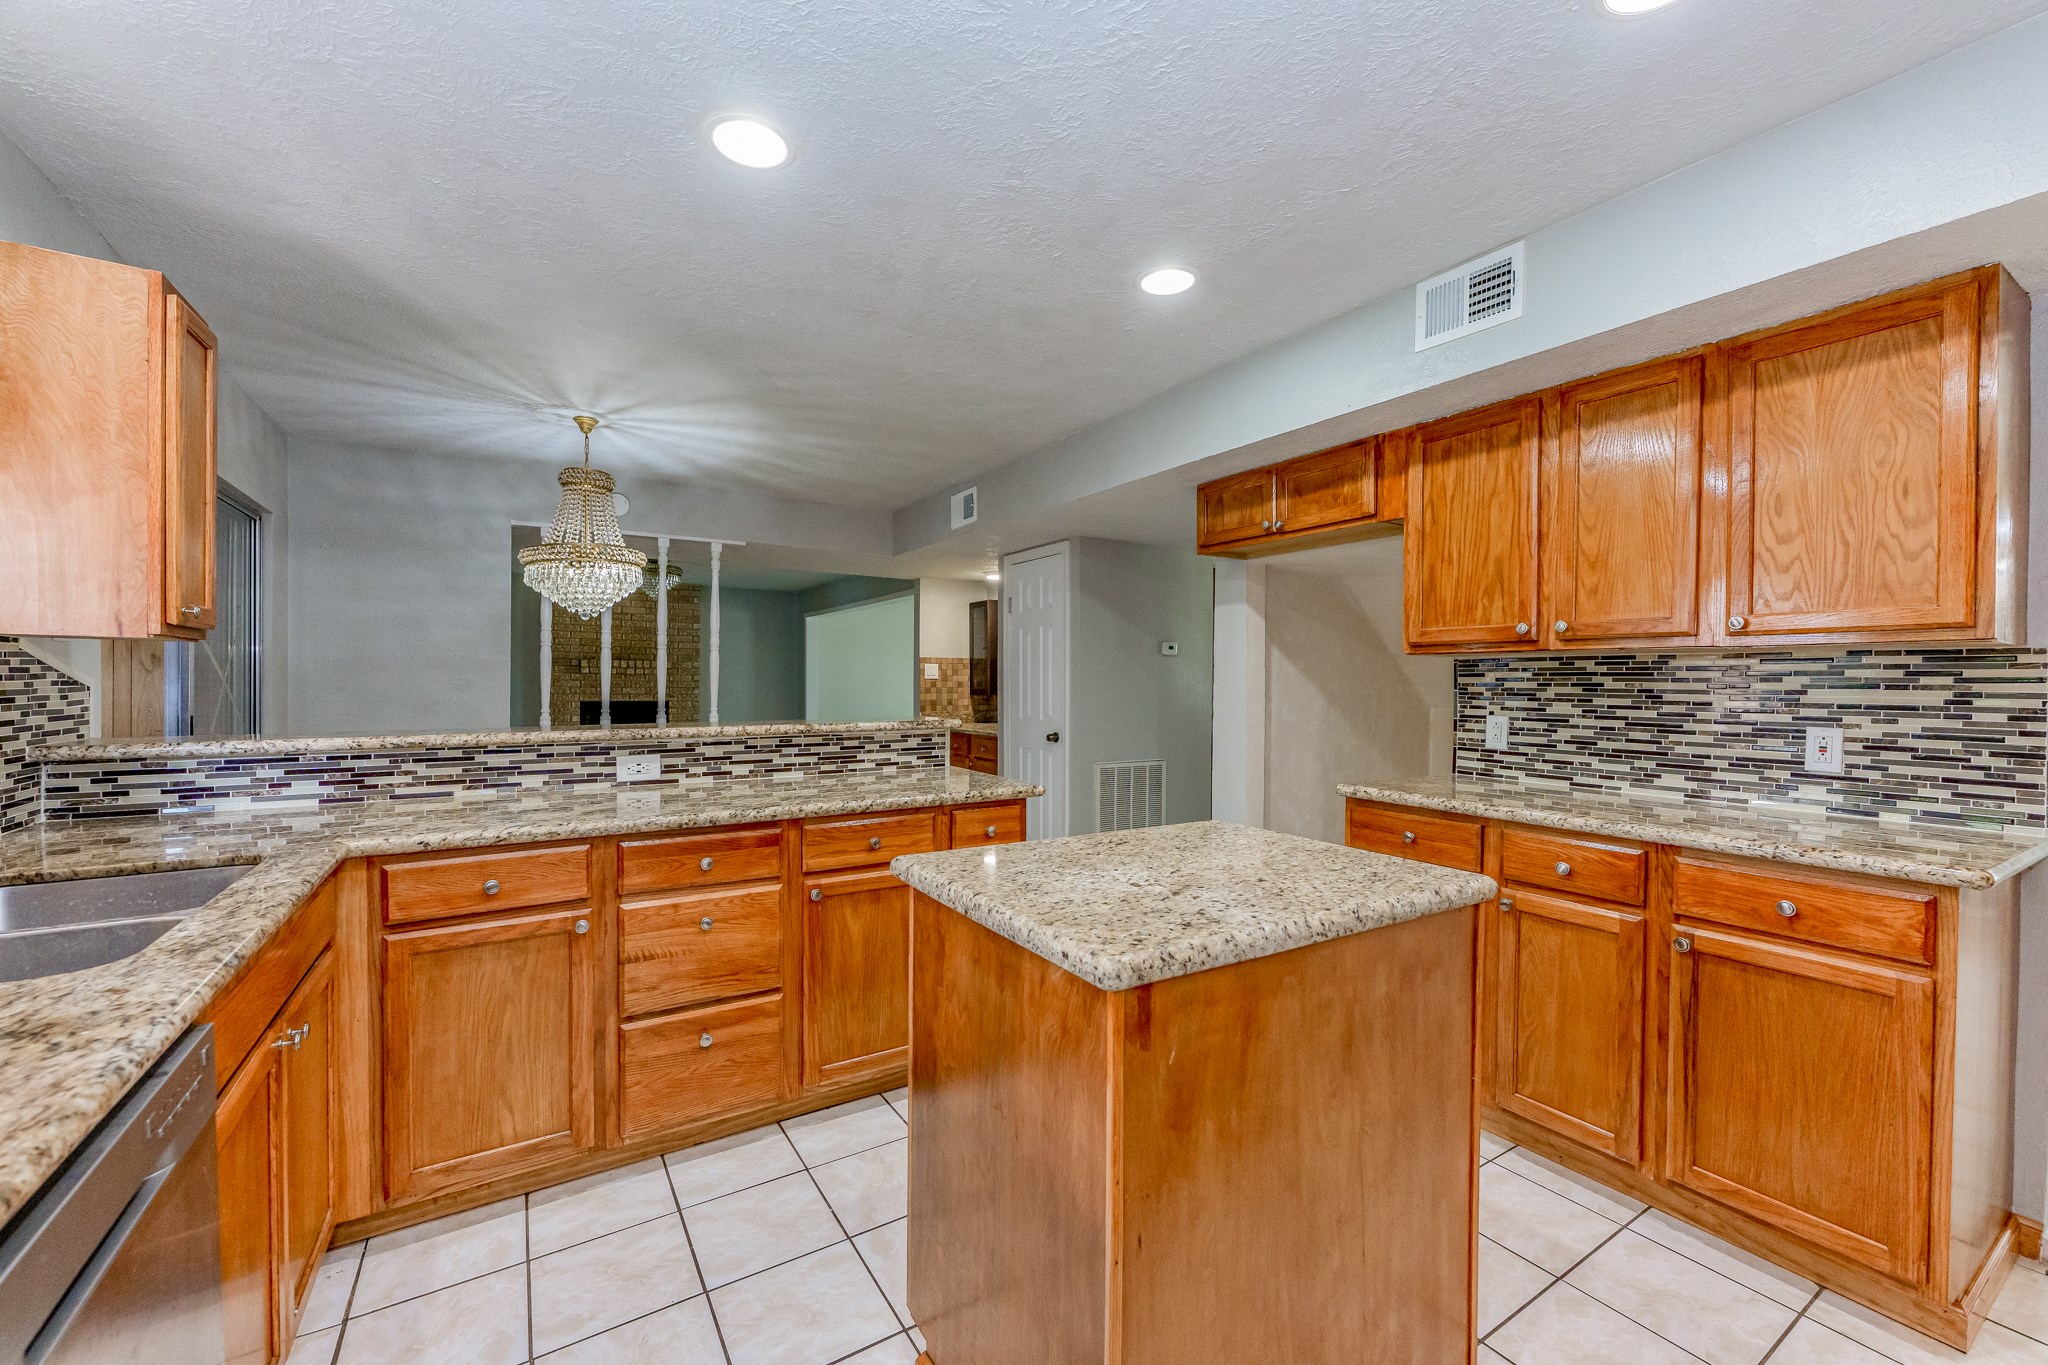 Sophisticated tile back splash are great features in this kitchen - If you have additional questions regarding 459 Woodrail Drive  in Houston or would like to tour the property with us call 800-660-1022 and reference MLS# 22334908.